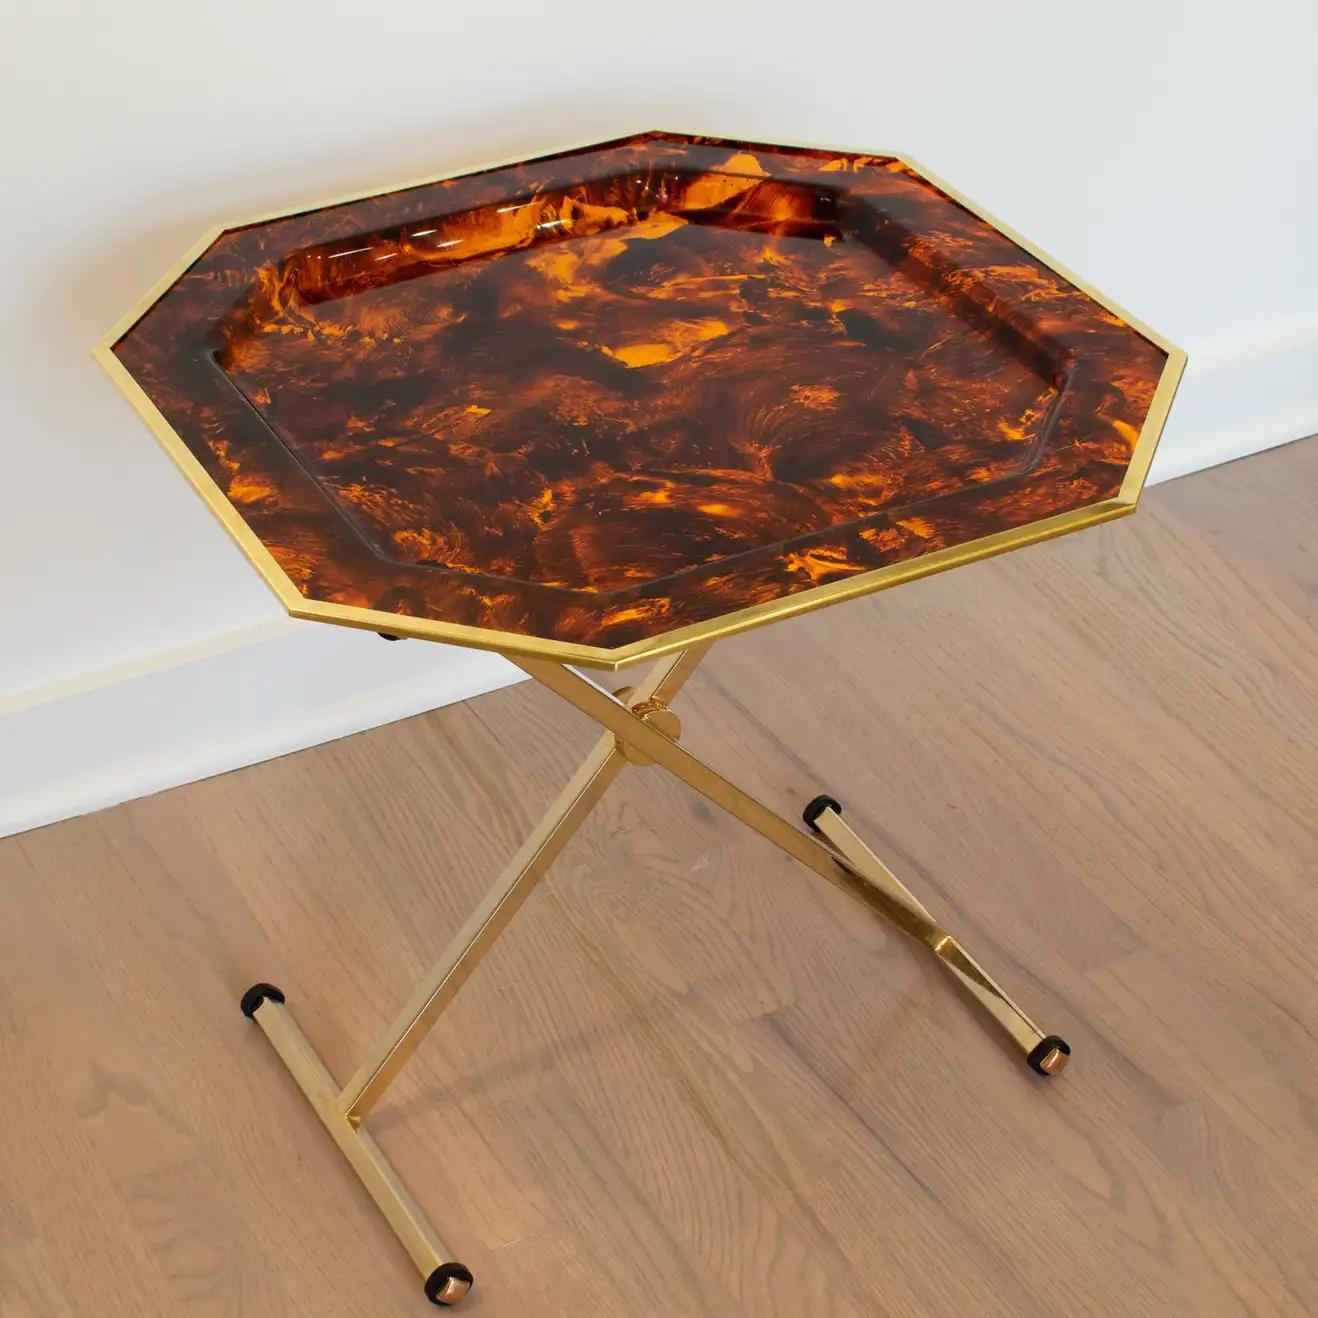 Maison Mercier Folding Tray Table Brass and Tortoiseshell Lucite, France 1960s In Good Condition For Sale In Atlanta, GA